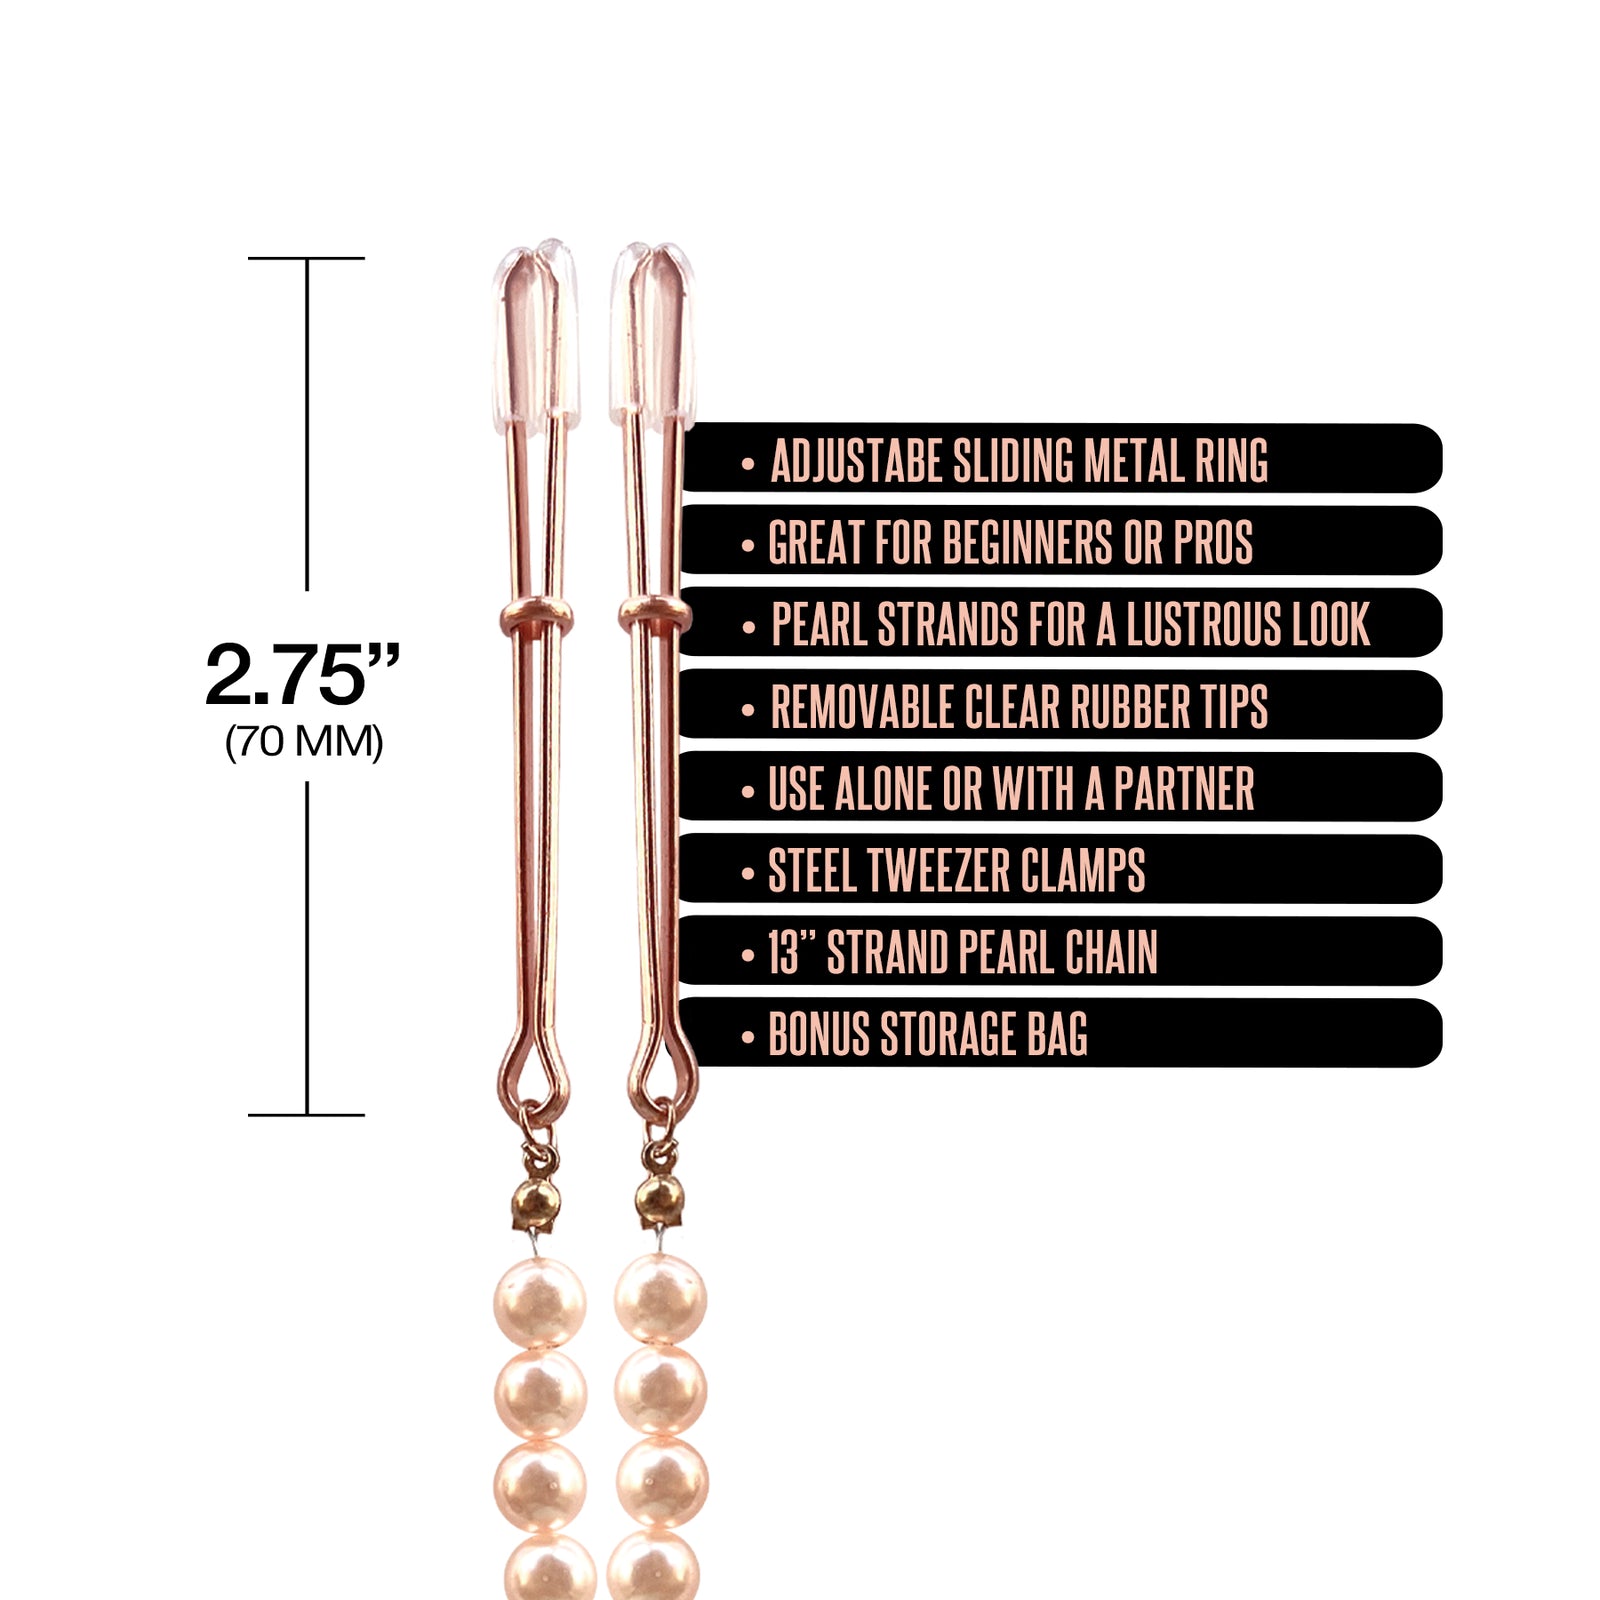 NIXIE Pearl Drop Tweezer Nipple Clamps, Rose Gold - THES